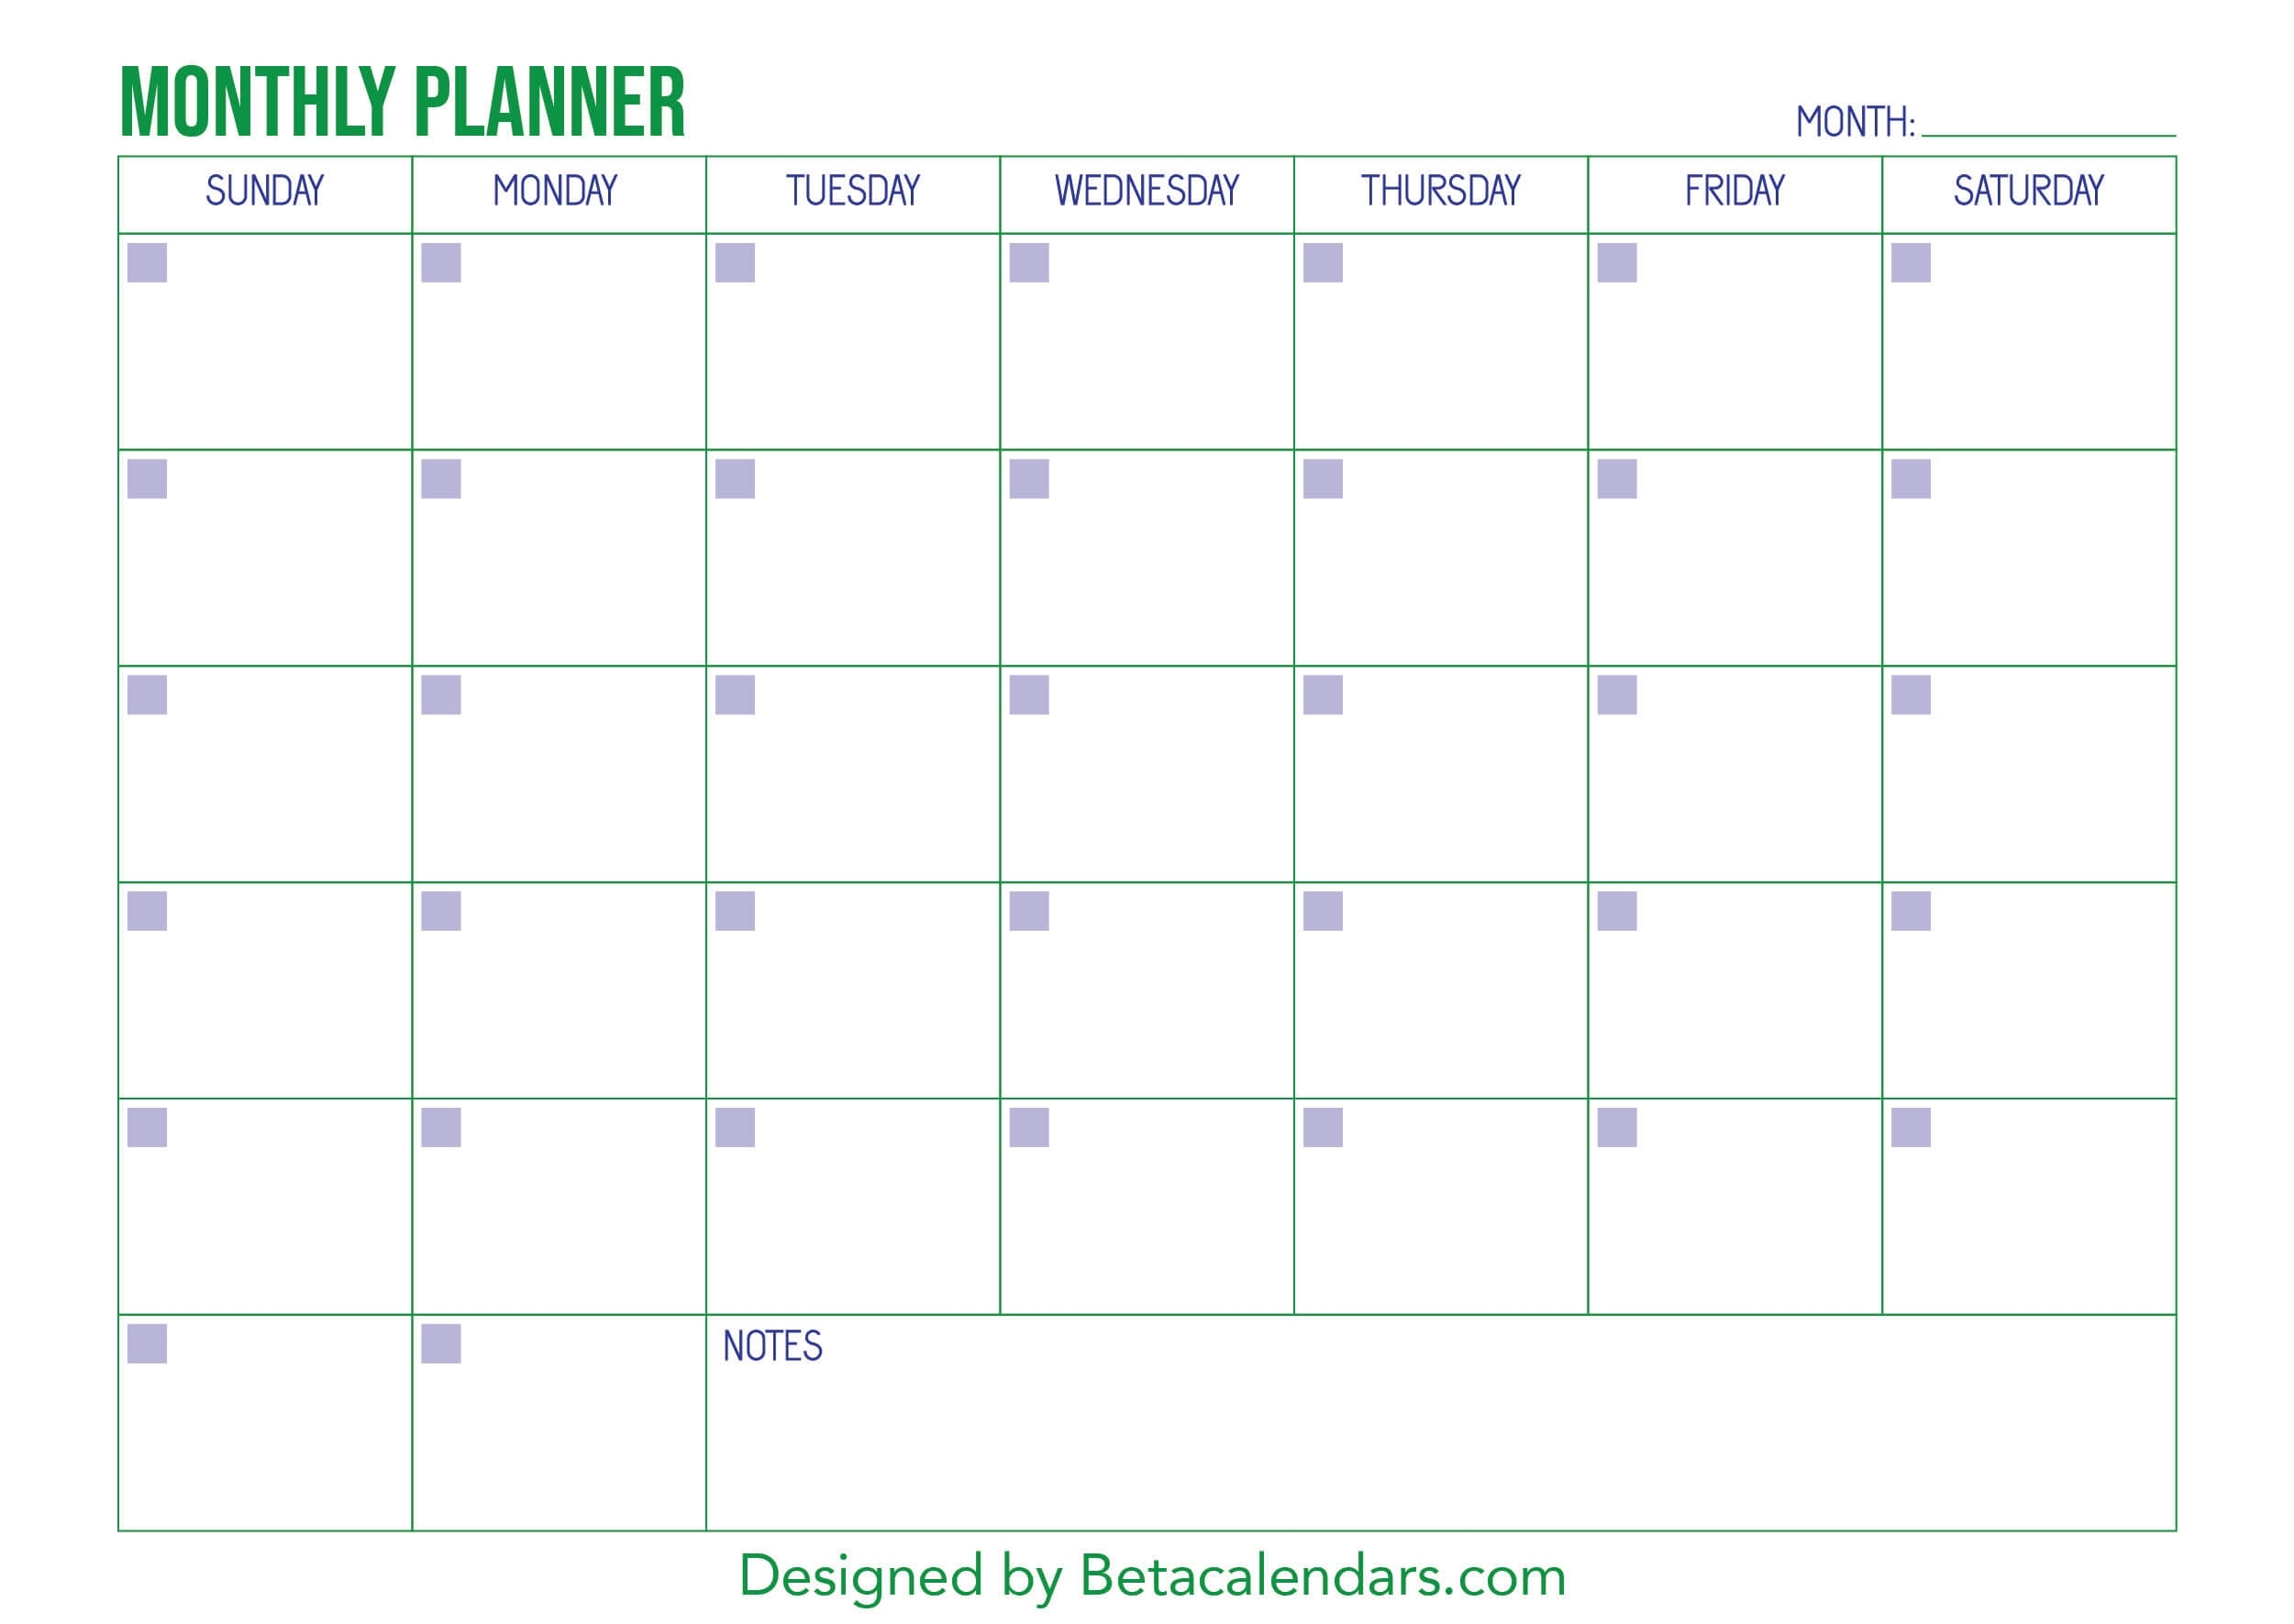 Free Printable Monthly Planner - Beta Calendars Month At A Glance Blank Template